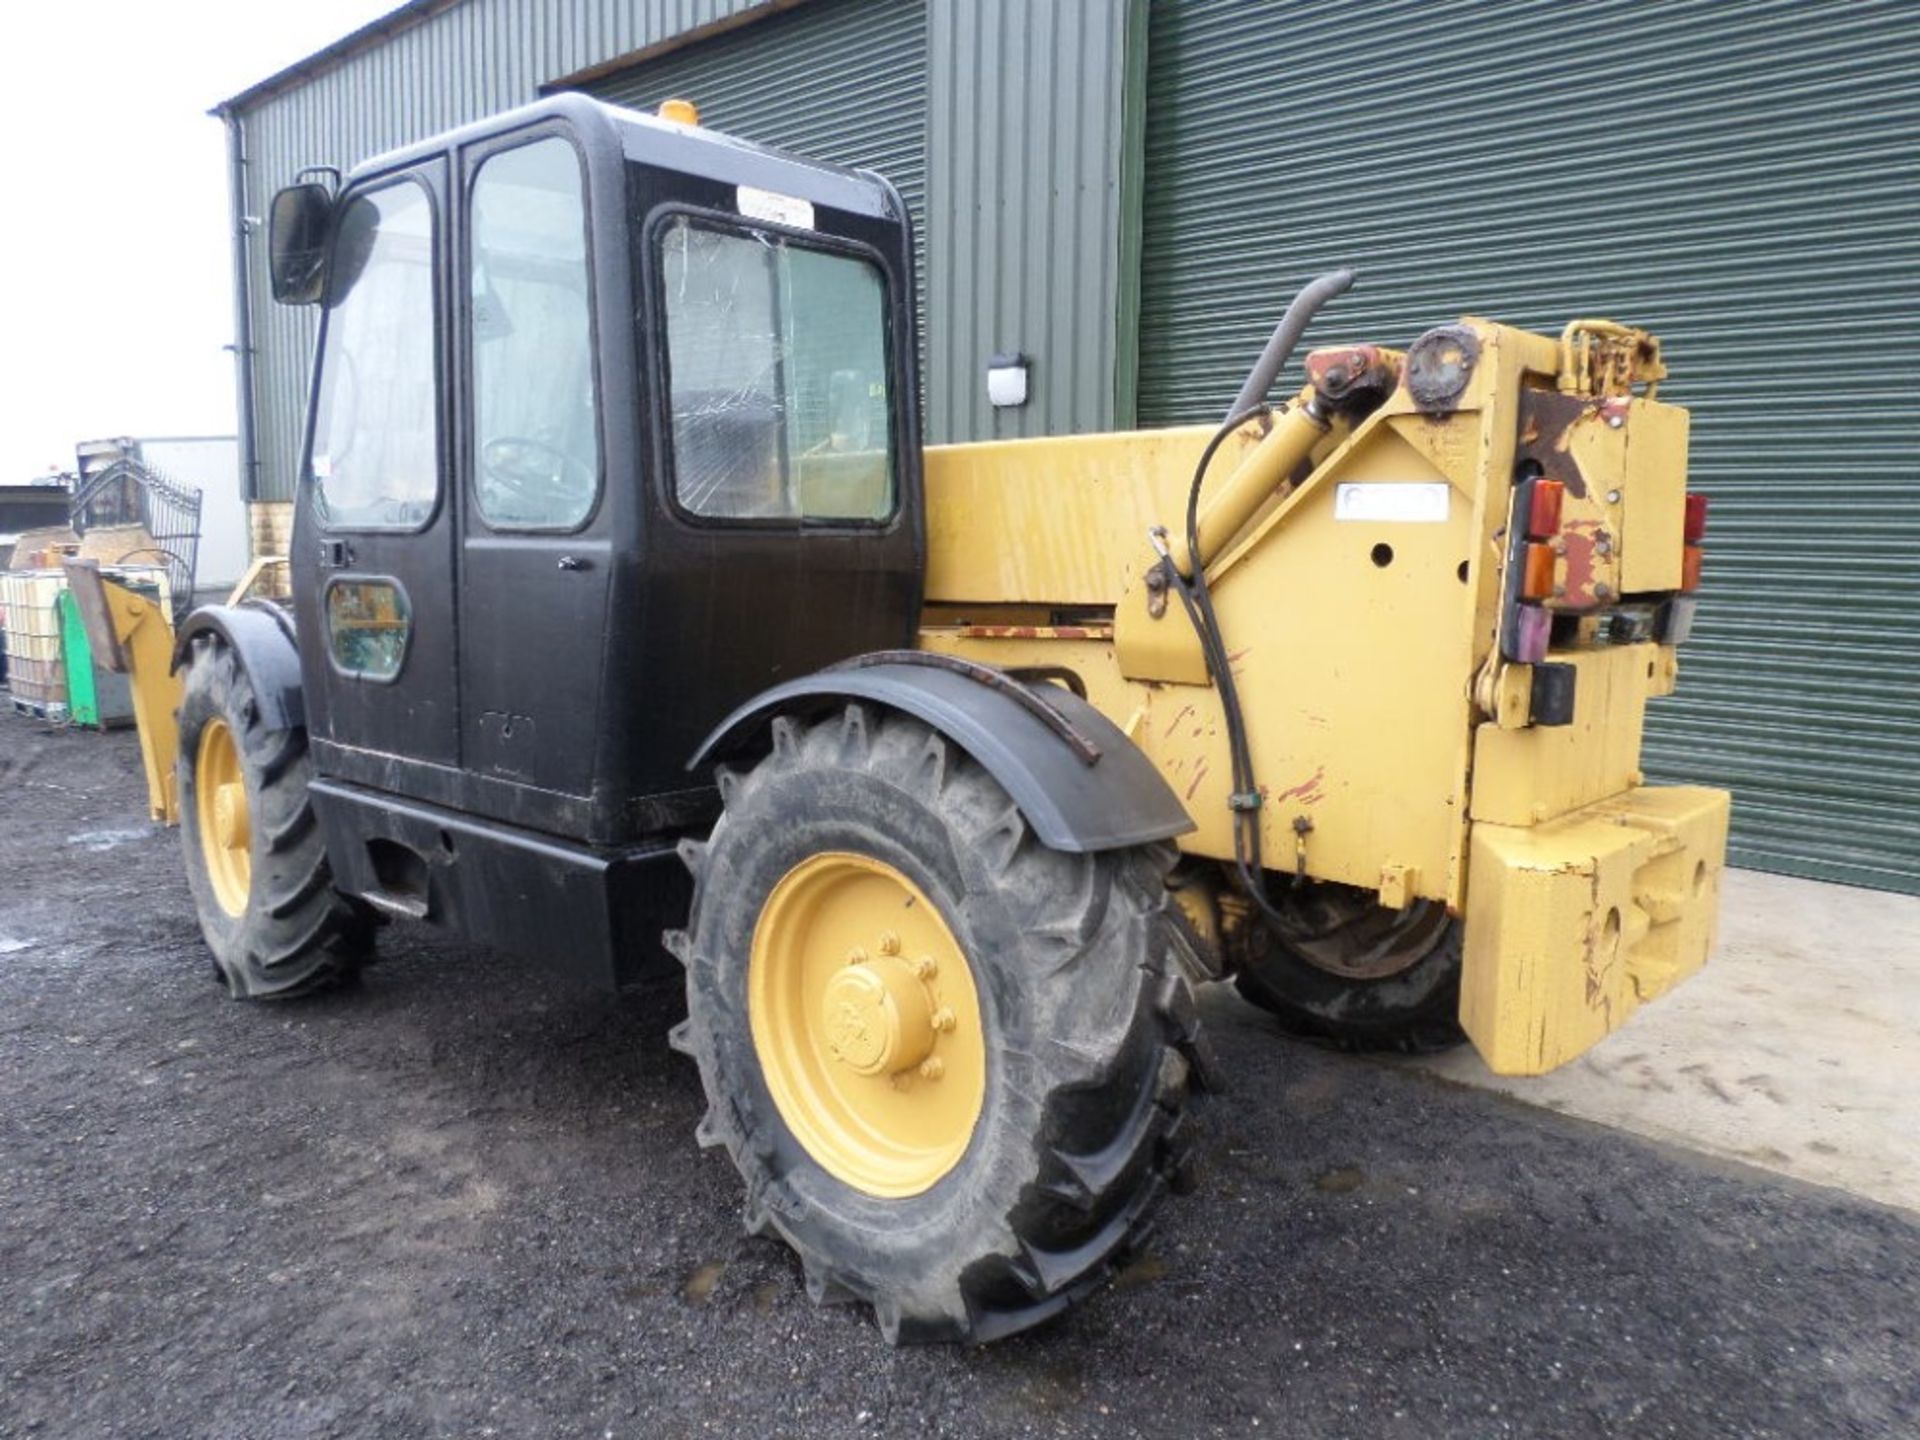 1999 CAT TH63 TELEPORTER (LOCATION SHEFFIELD) 5612 HOURS (RING FOR COLLECTION DETAILS) [+ VAT]